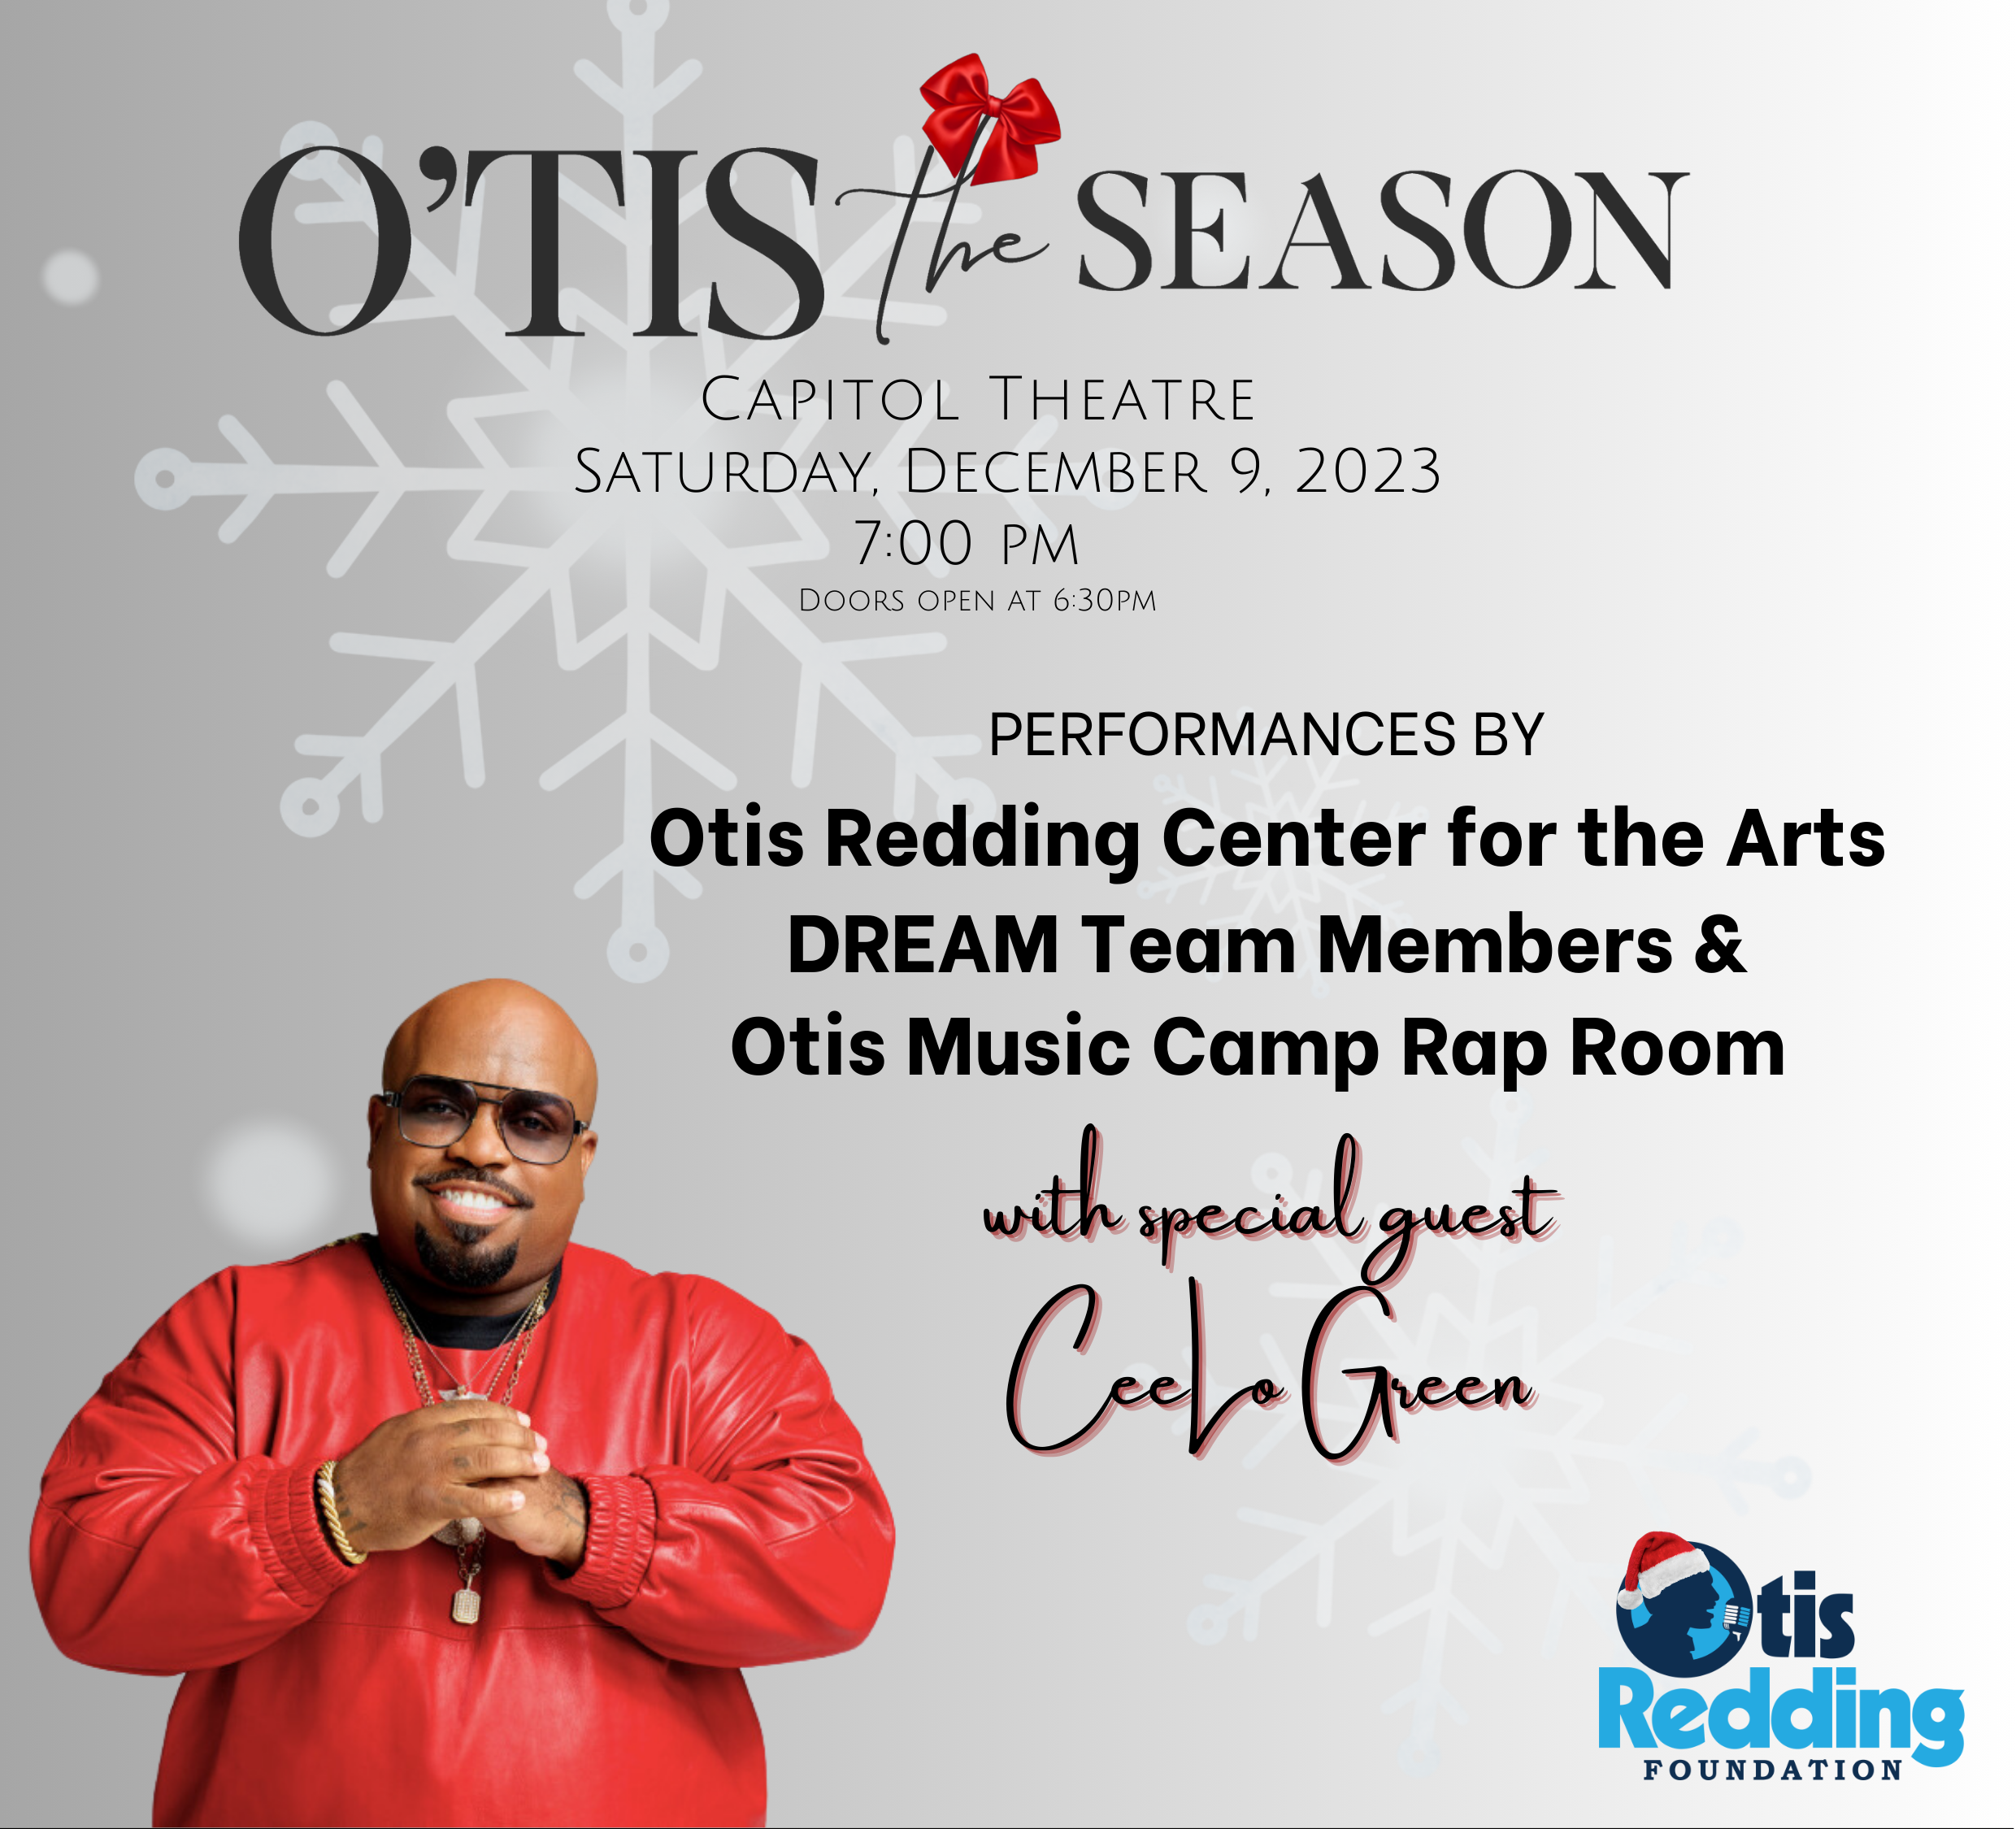 CeeLo Green to perform at the Otis Redding Foundation's annual O'Tis The Season Holiday Benefit Concert